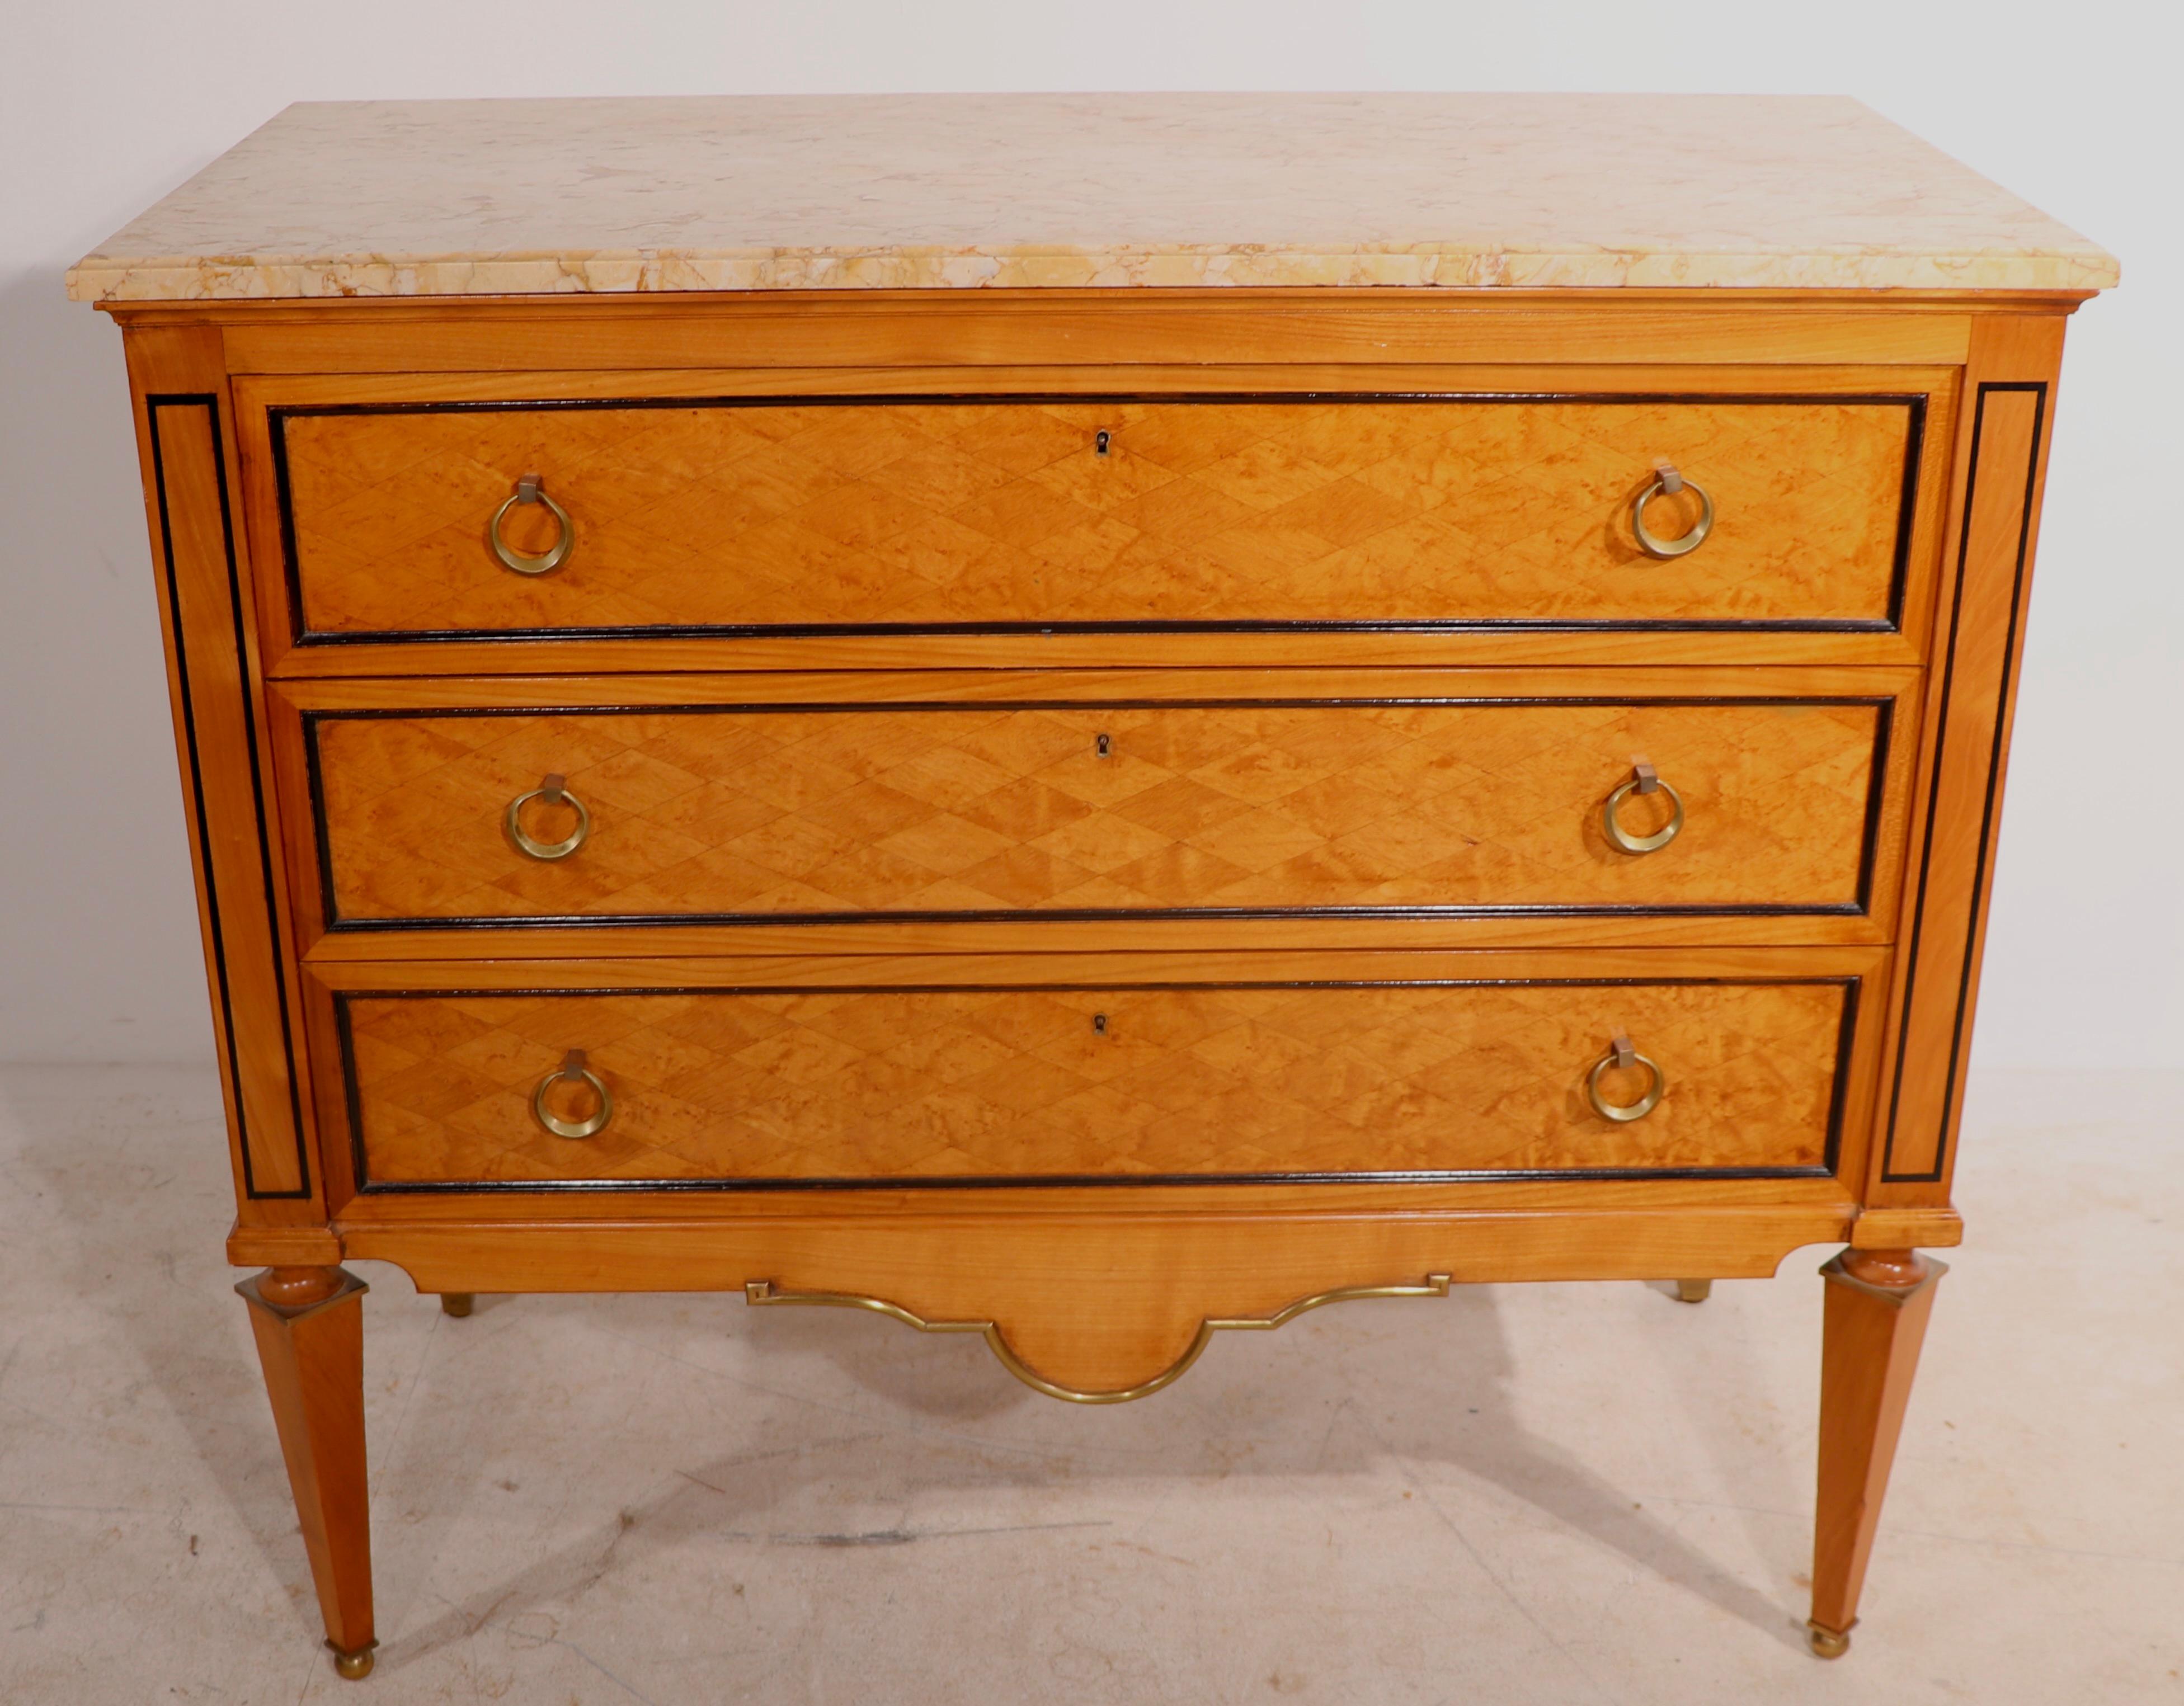 Sumptuous three drawer satinwood marquetry case, with sophisticated brass trim and circular drop pulls, supports the thick marble top. We believe this chic commode was created in Italy circa 1940/1960's, however it is unsigned. This example is in